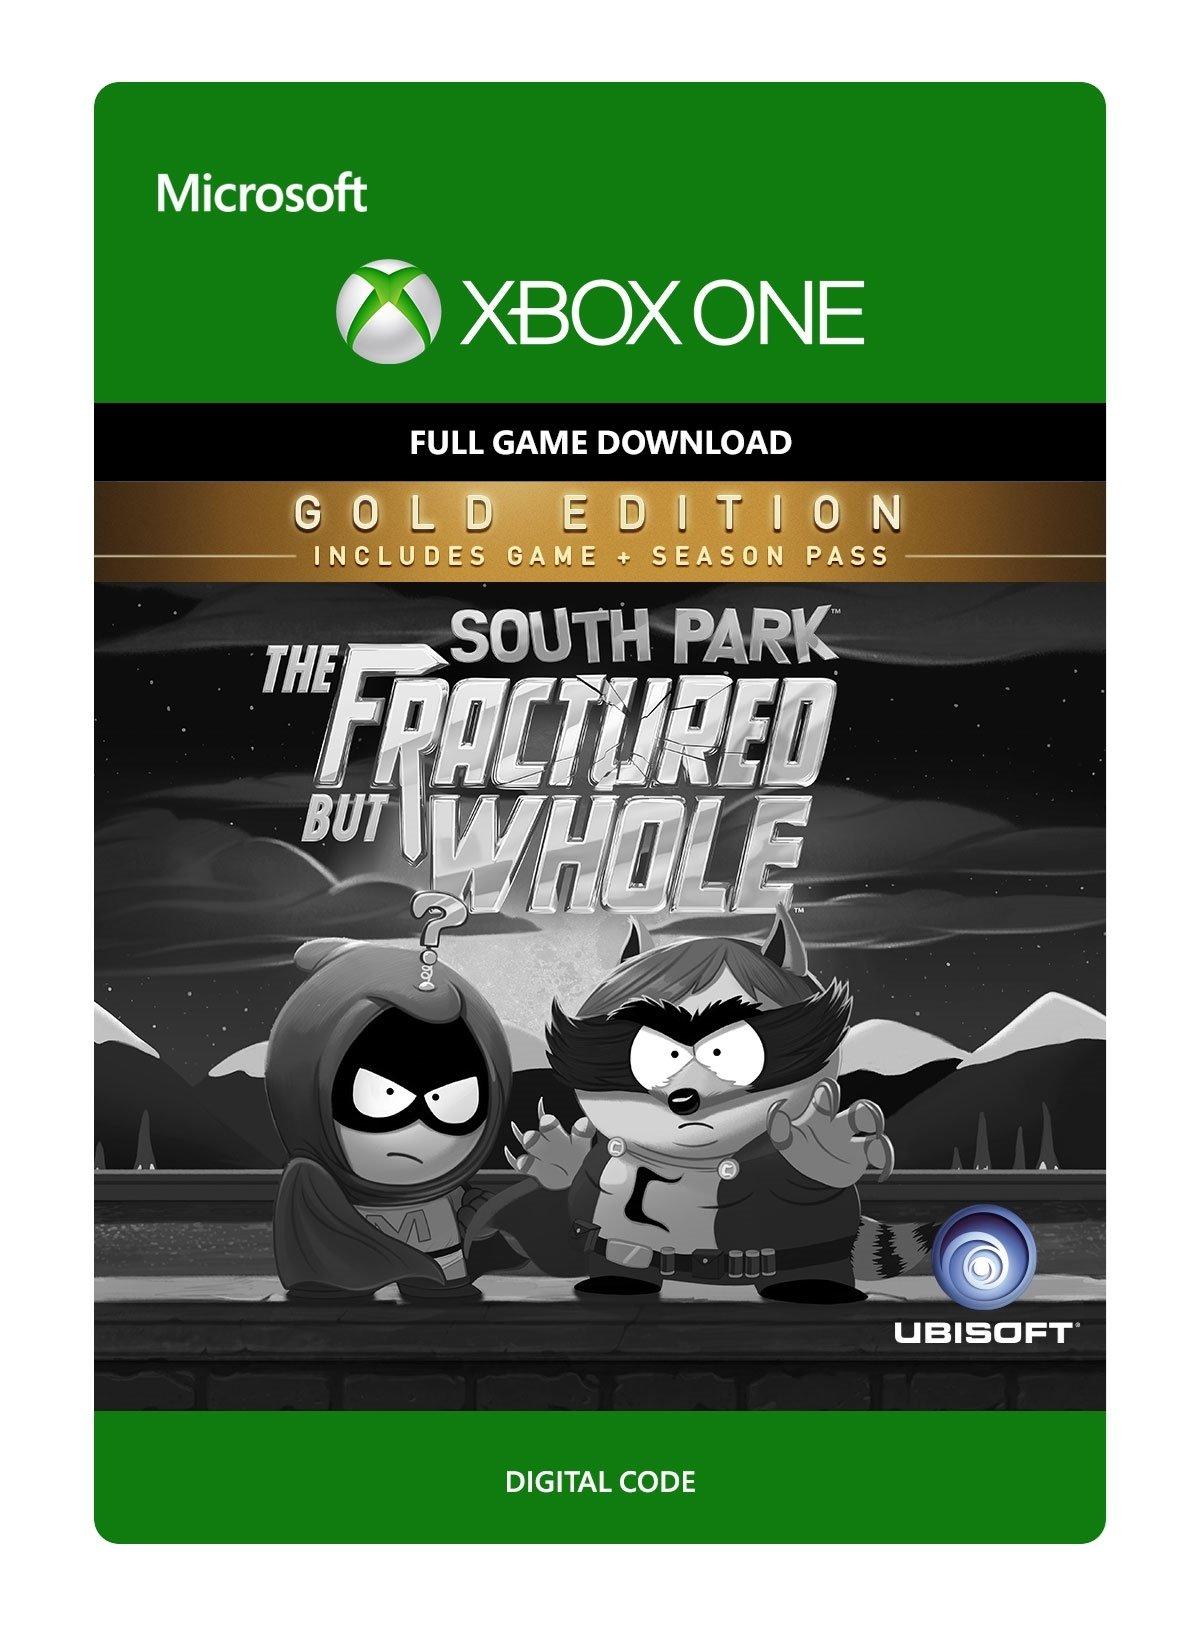 South Park: Fractured But Whole: Gold Edition - Xbox One - Game | G3Q-00183 (a8bcdee6-7157-4bfe-9f29-9c907a959ce8)